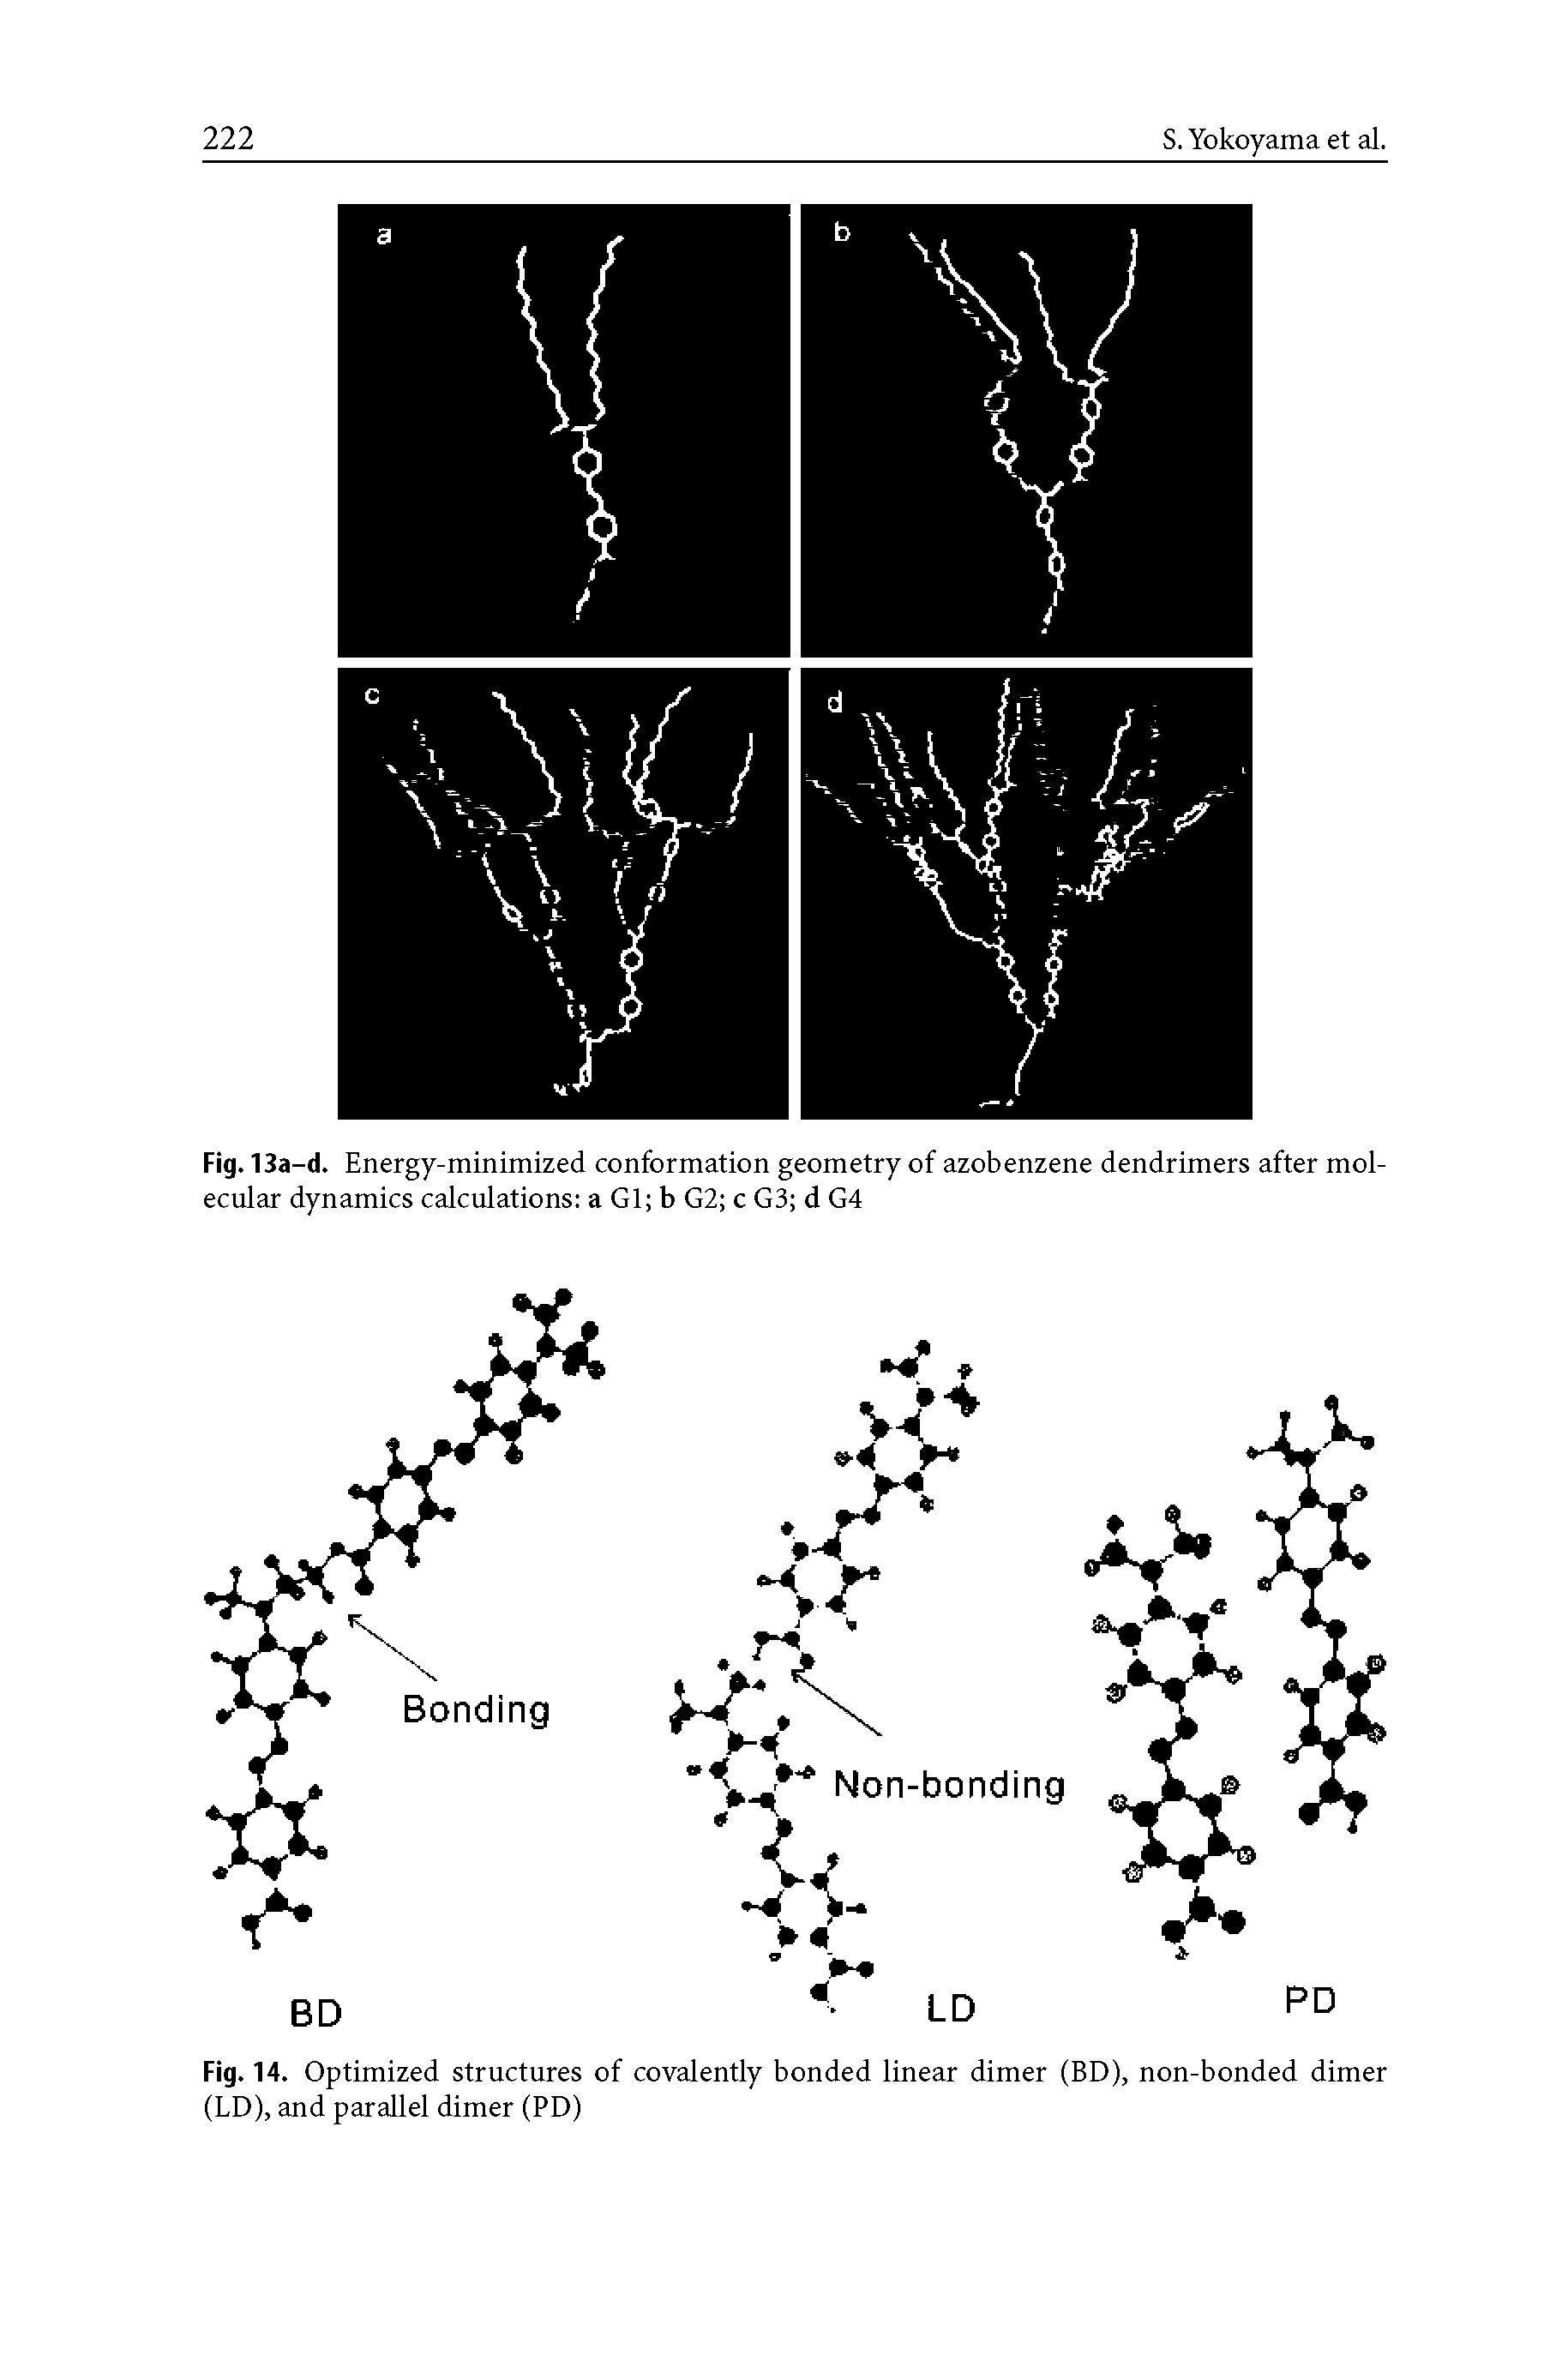 Fig. 14. Optimized structures of covalently bonded linear dimer (BD), non-bonded dimer (LD), and parallel dimer (PD)...